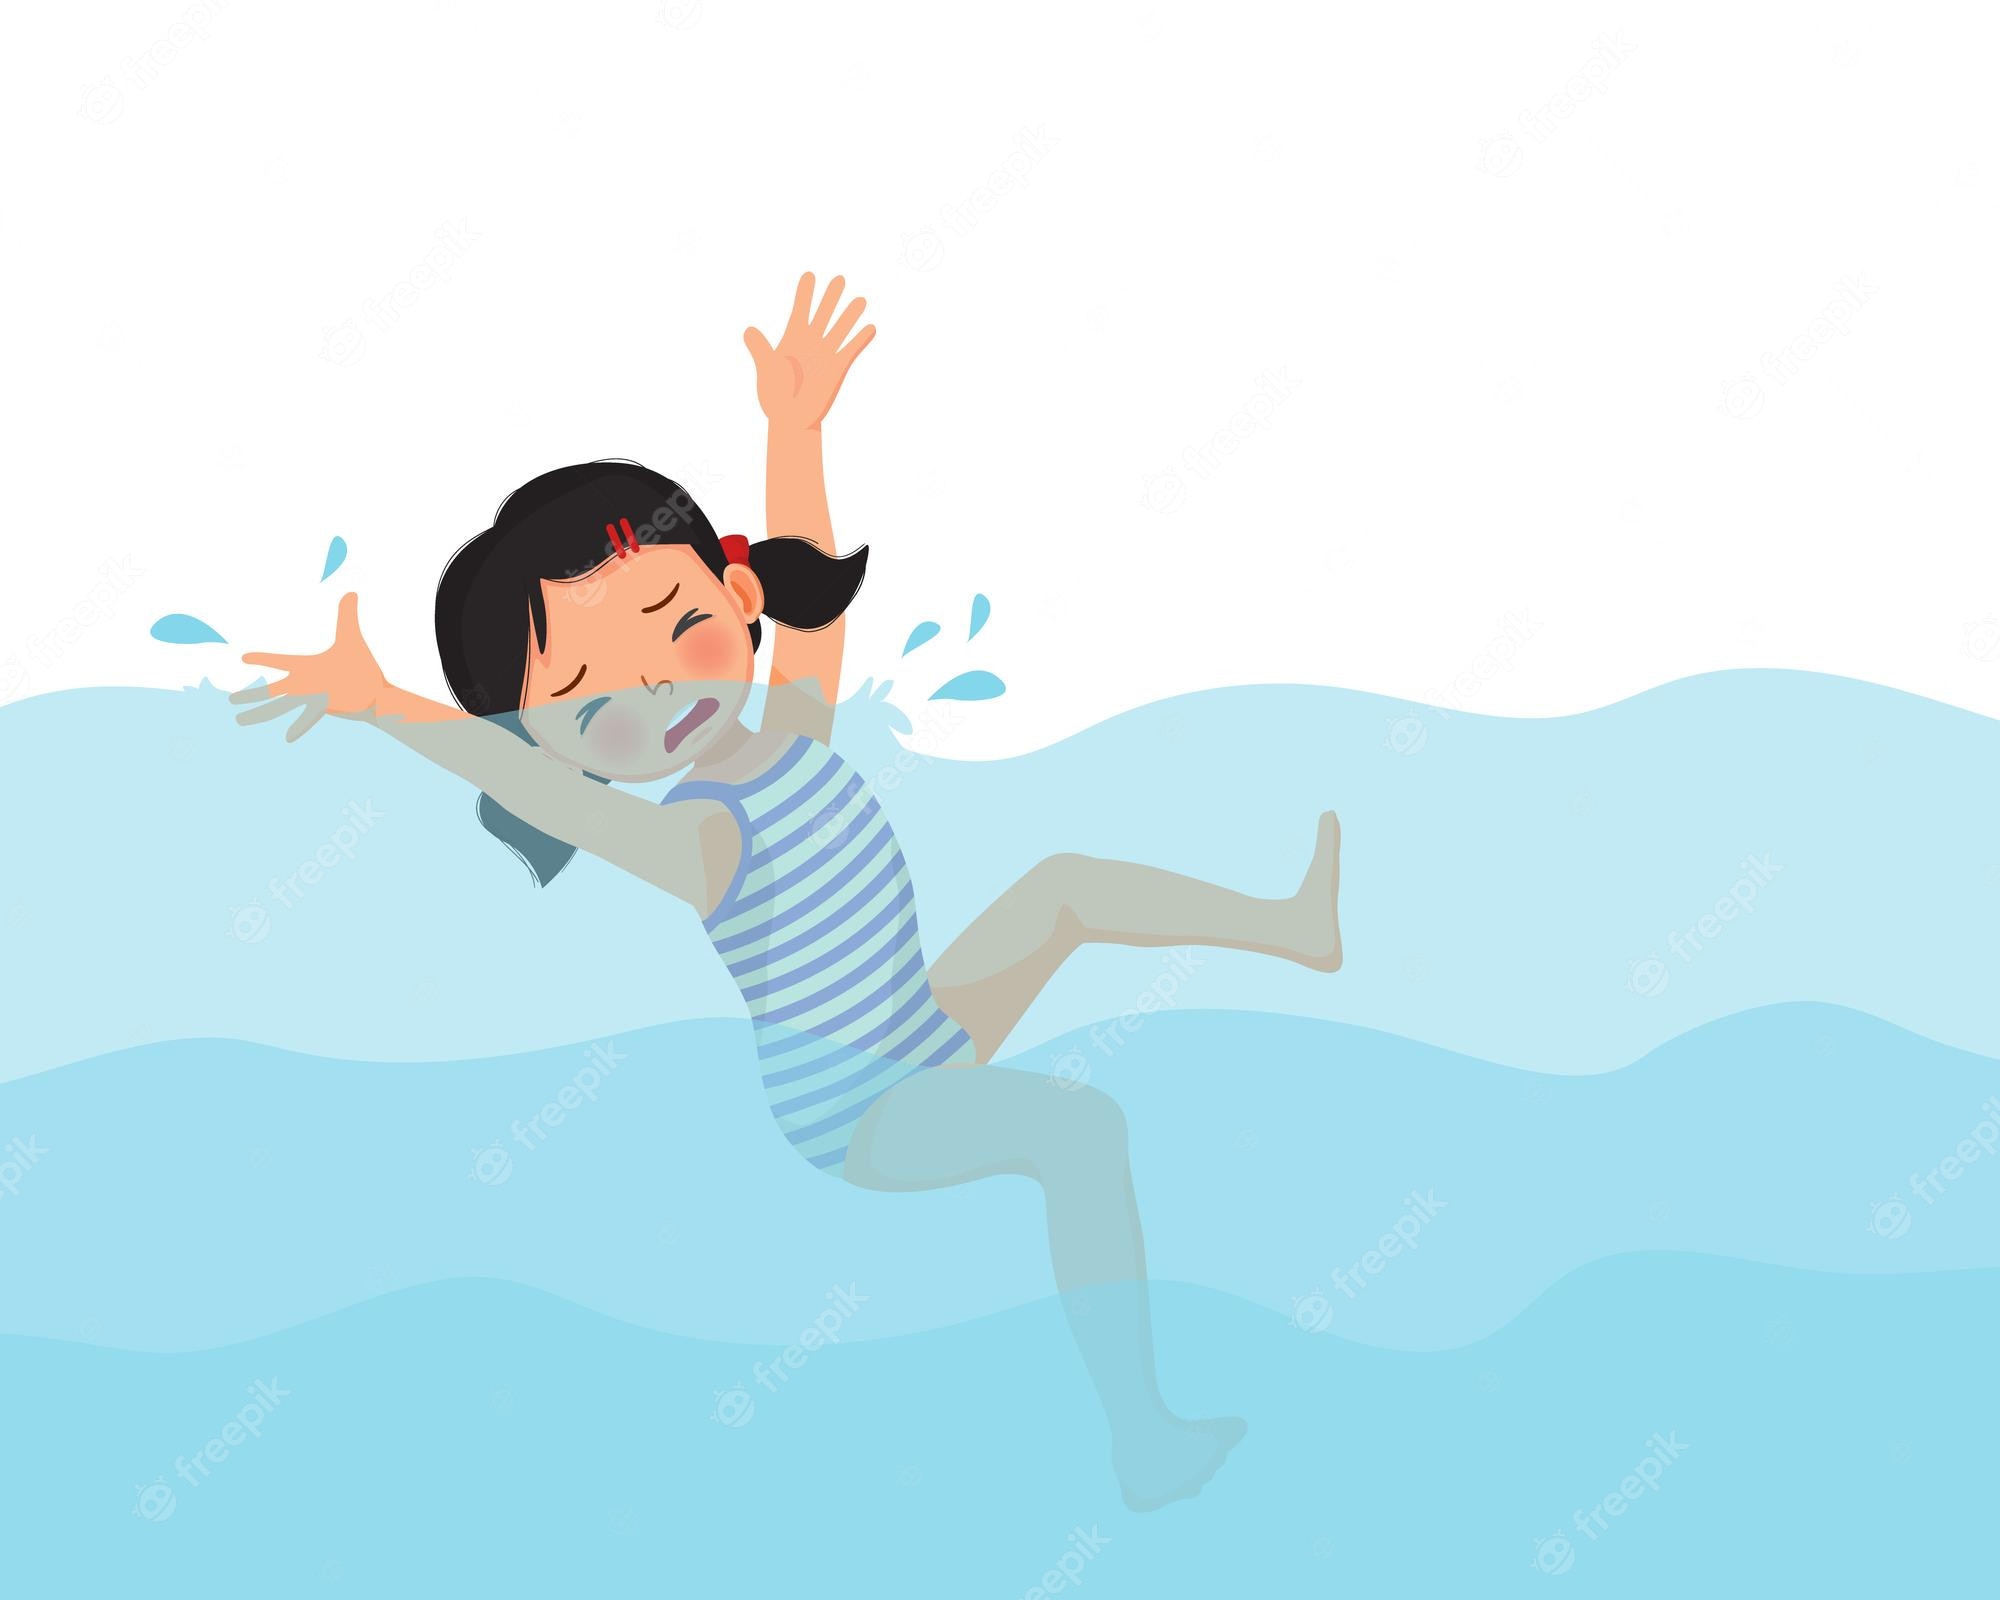 Drowning Clip Art and Stock Illustrations. 5,716 Drowning EPS - Clip ...